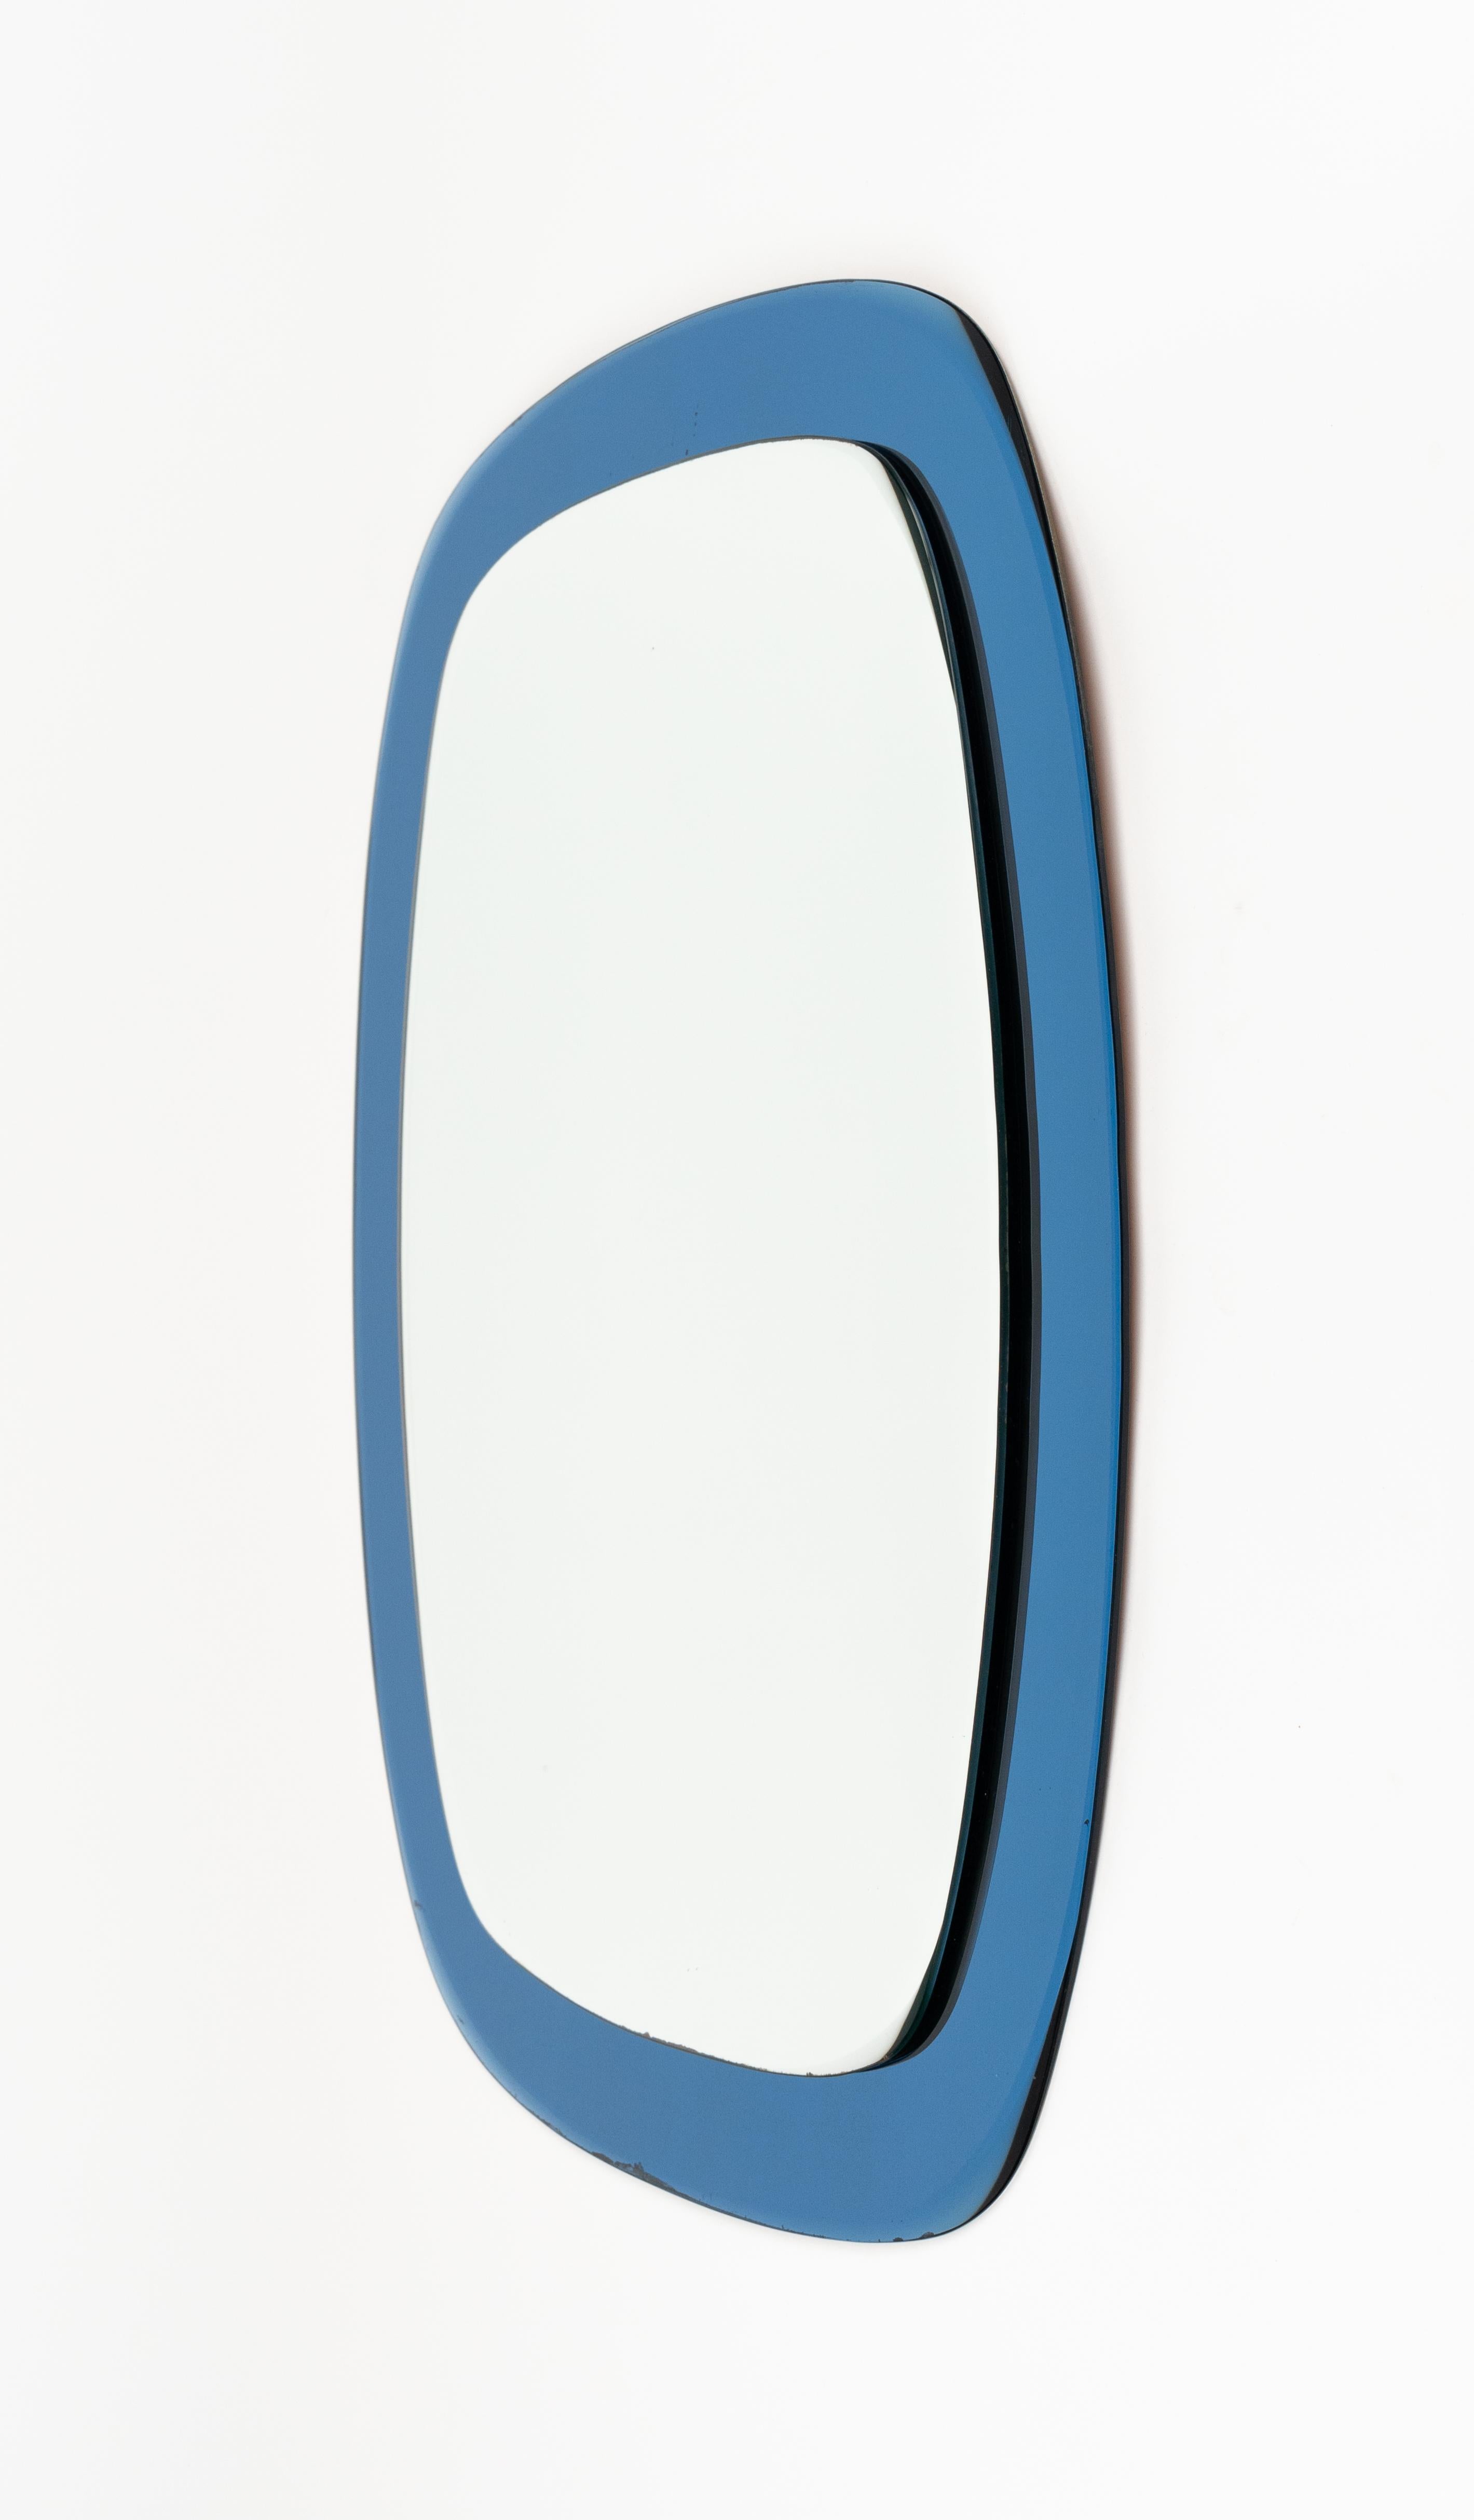 Midcentury Cristal Art Oval Wall Mirror with Blue Frame, Italy 1960s For Sale 1